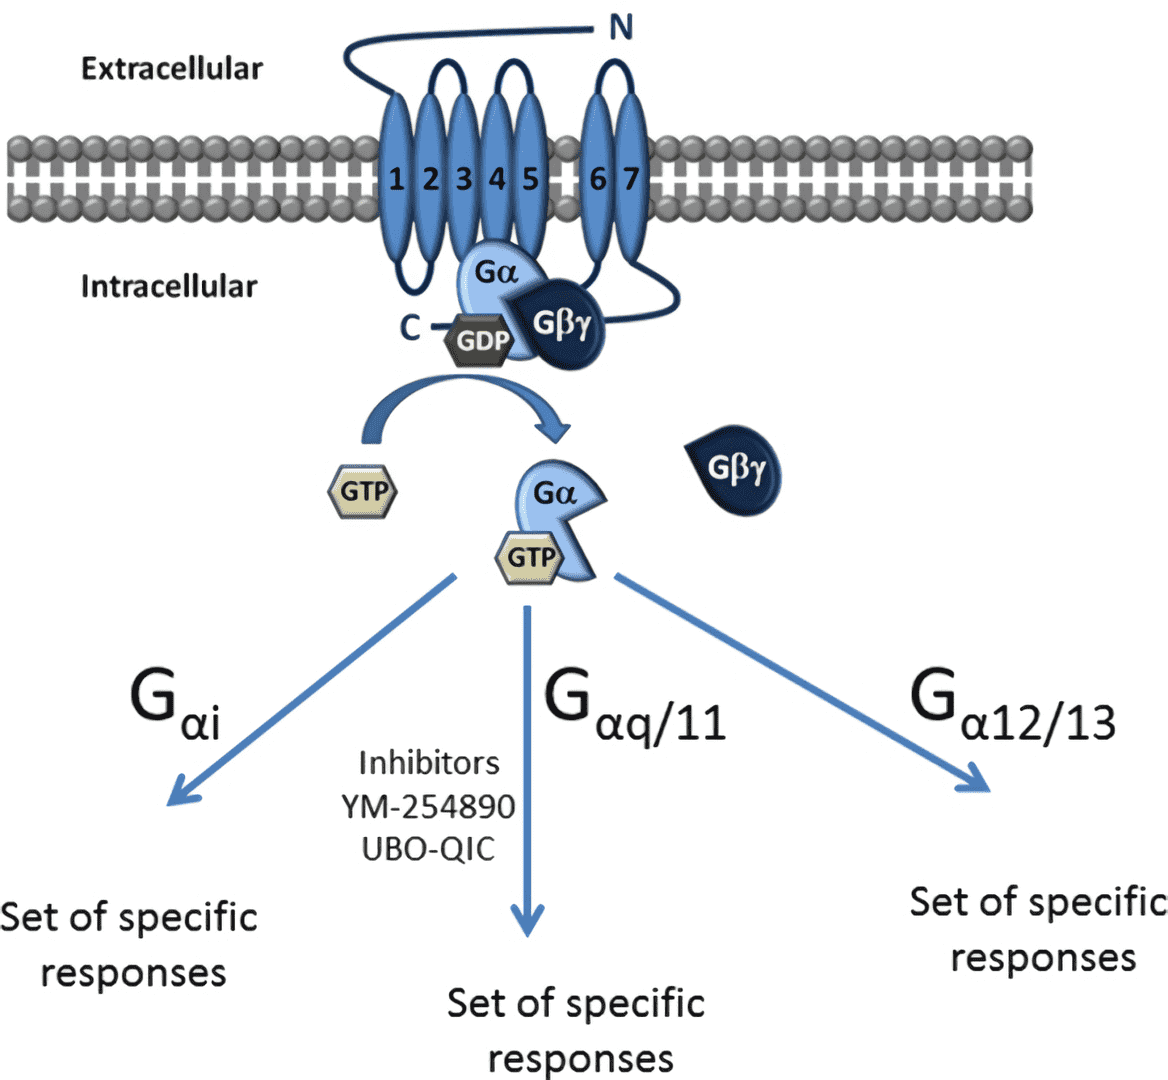 Classification of G proteins into four families according to their α subunit. 